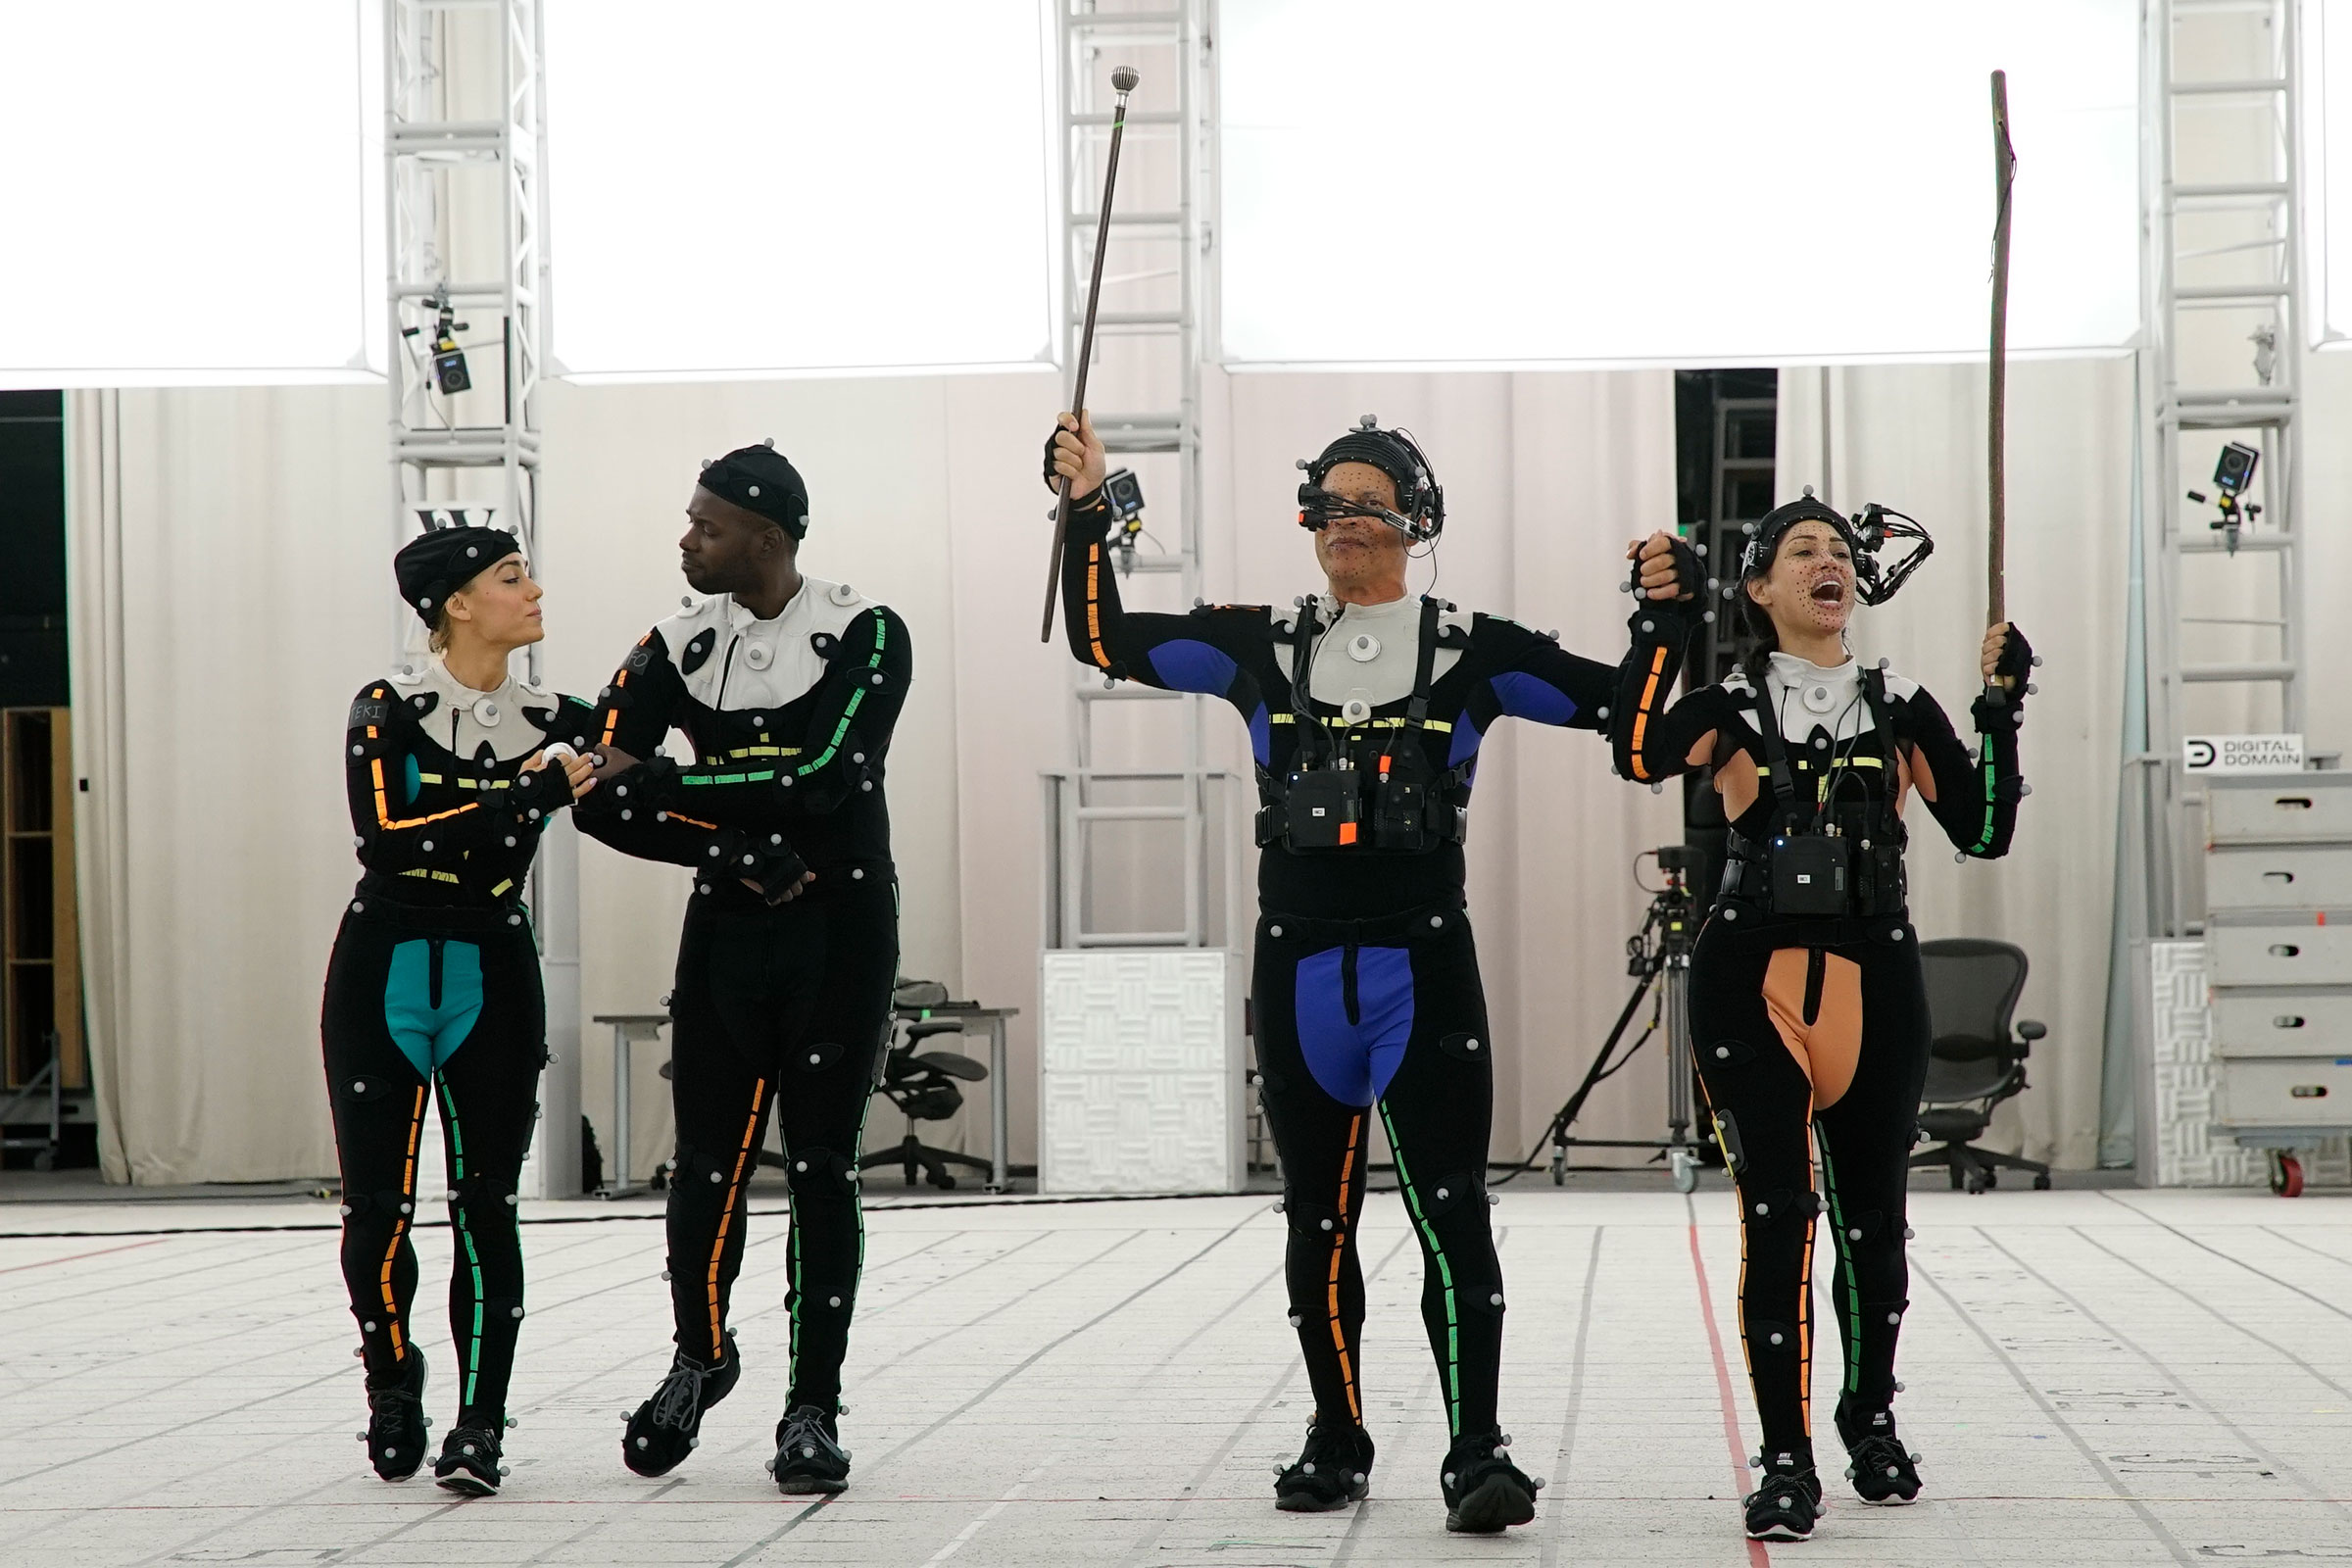 Motion capture actors perform for the virtual-reality experience The March on a soundstage at the Digital Domain studios in Los Angeles. (Dustin Bath)